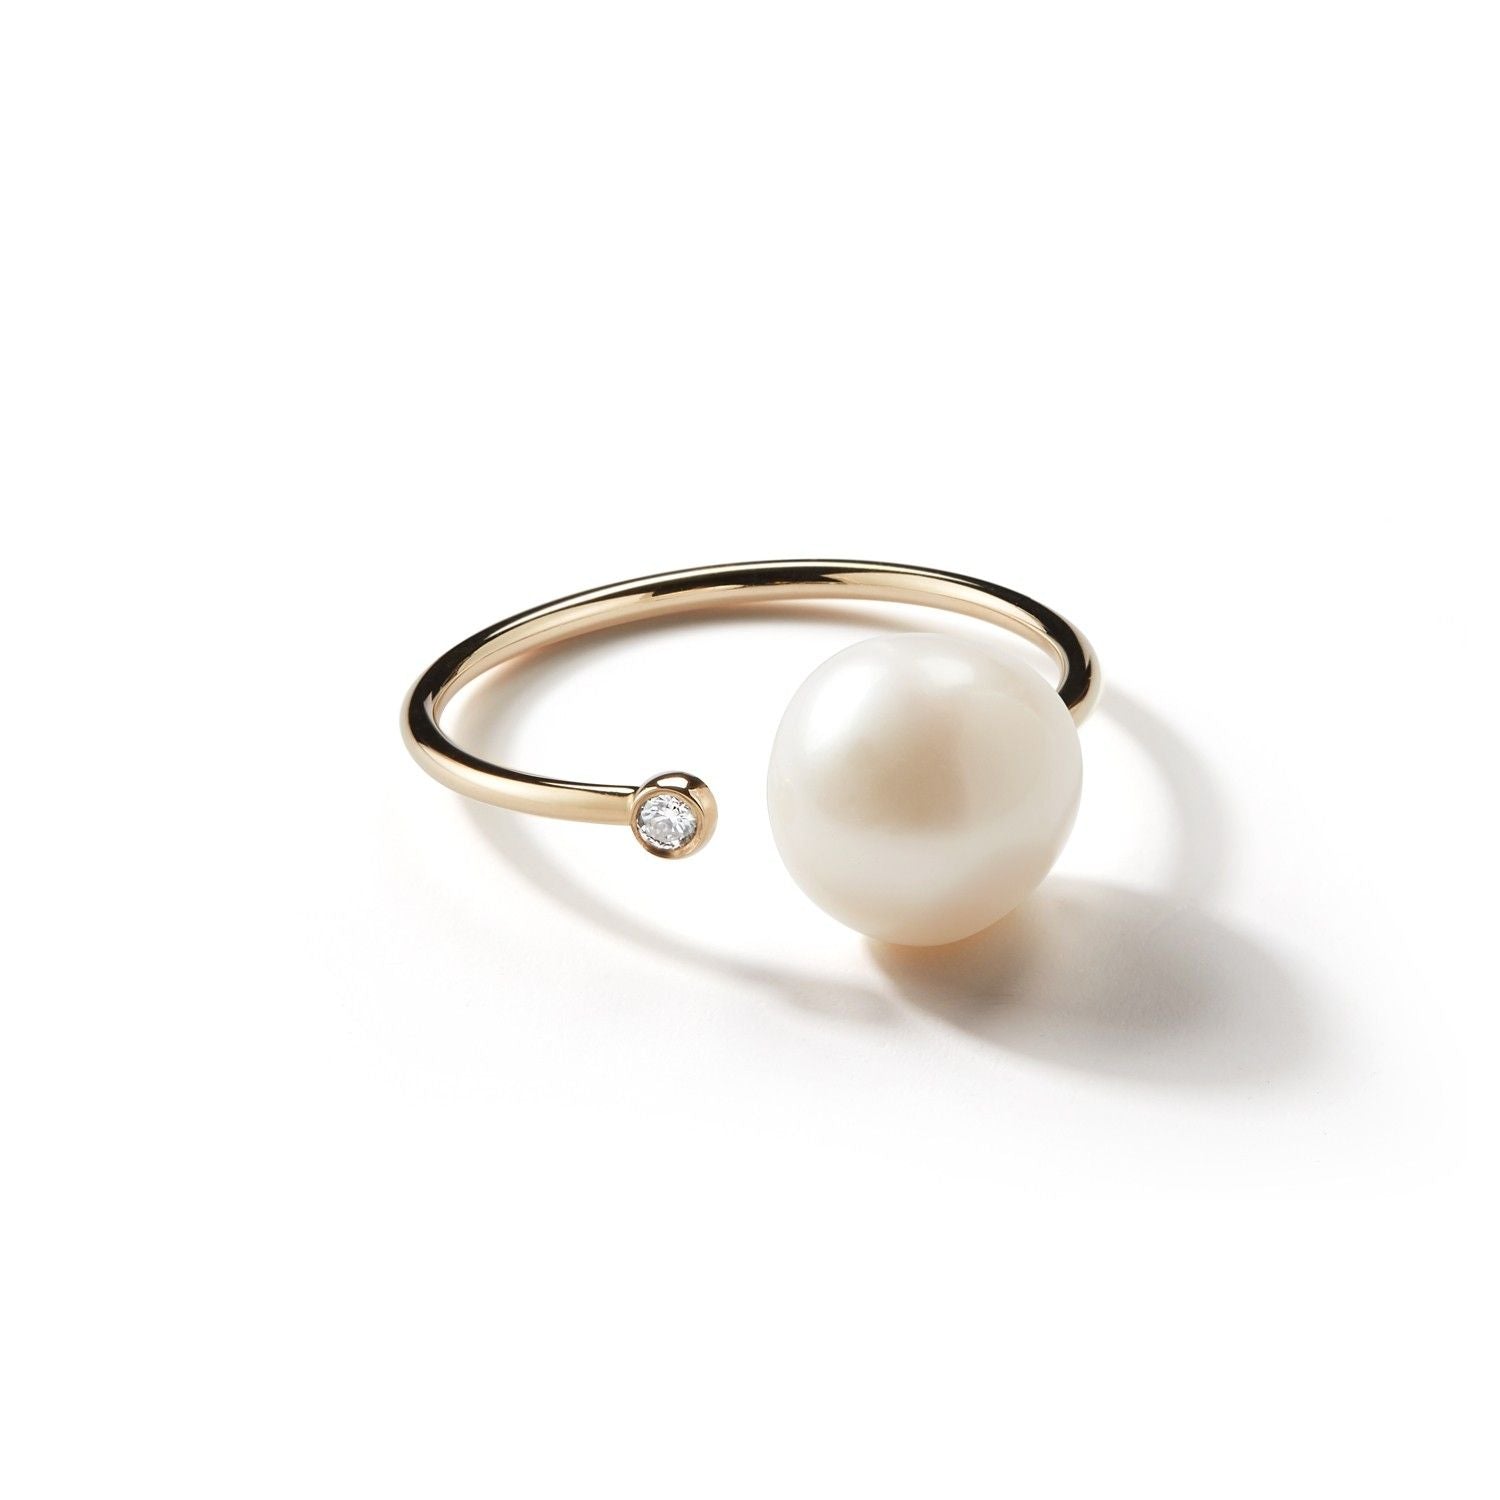 Sea of Beauty Collection. Small Open Diamond and White Pearl Thin Ring